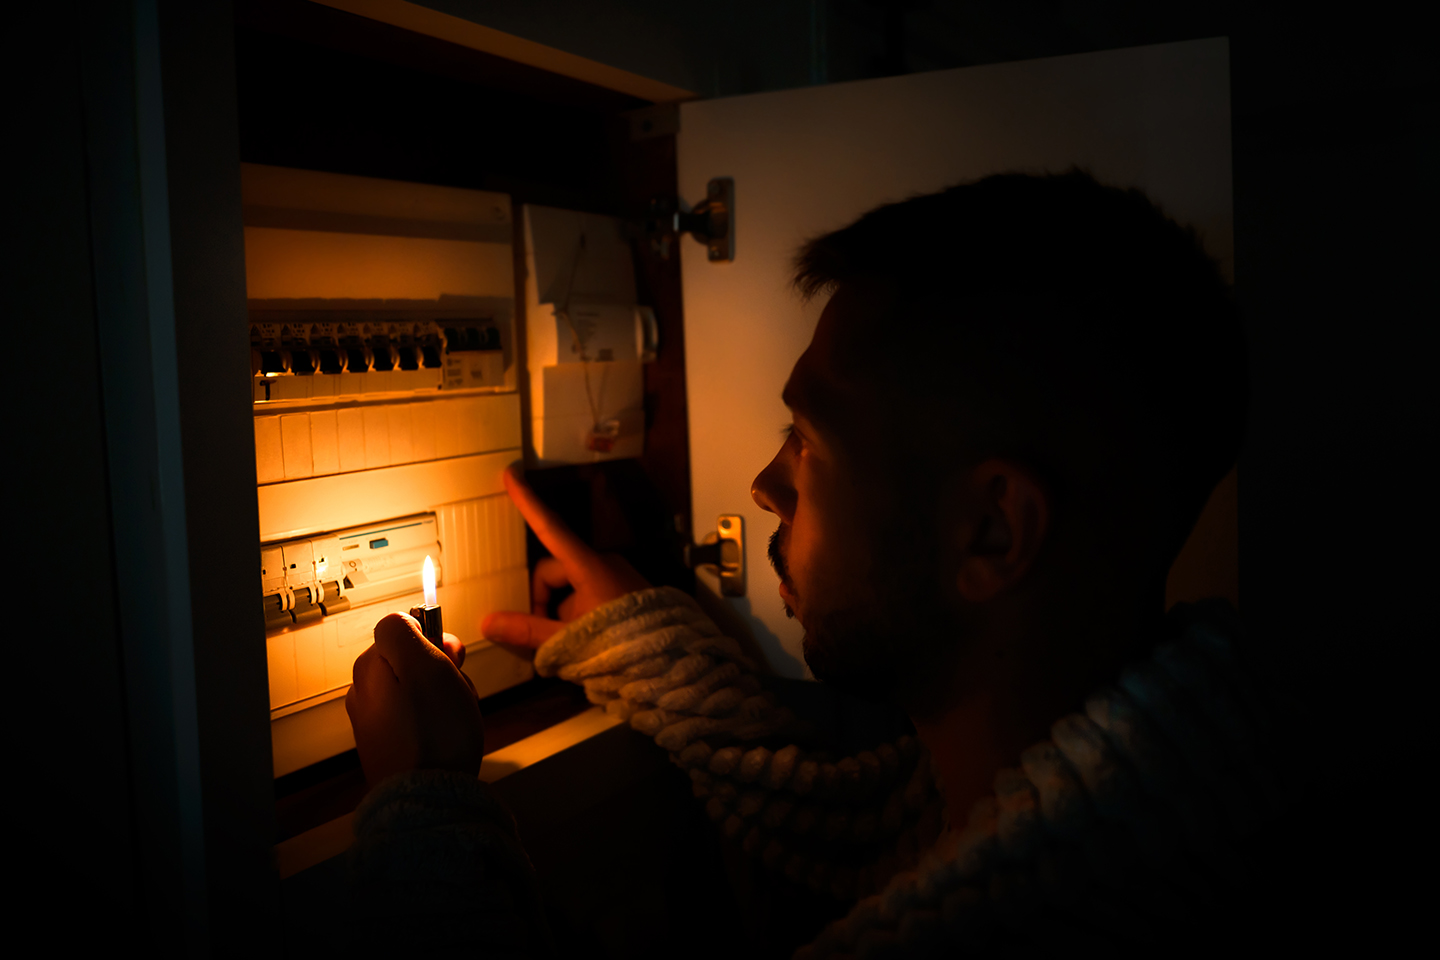 Man standing in the dark inspecting a power switchboard